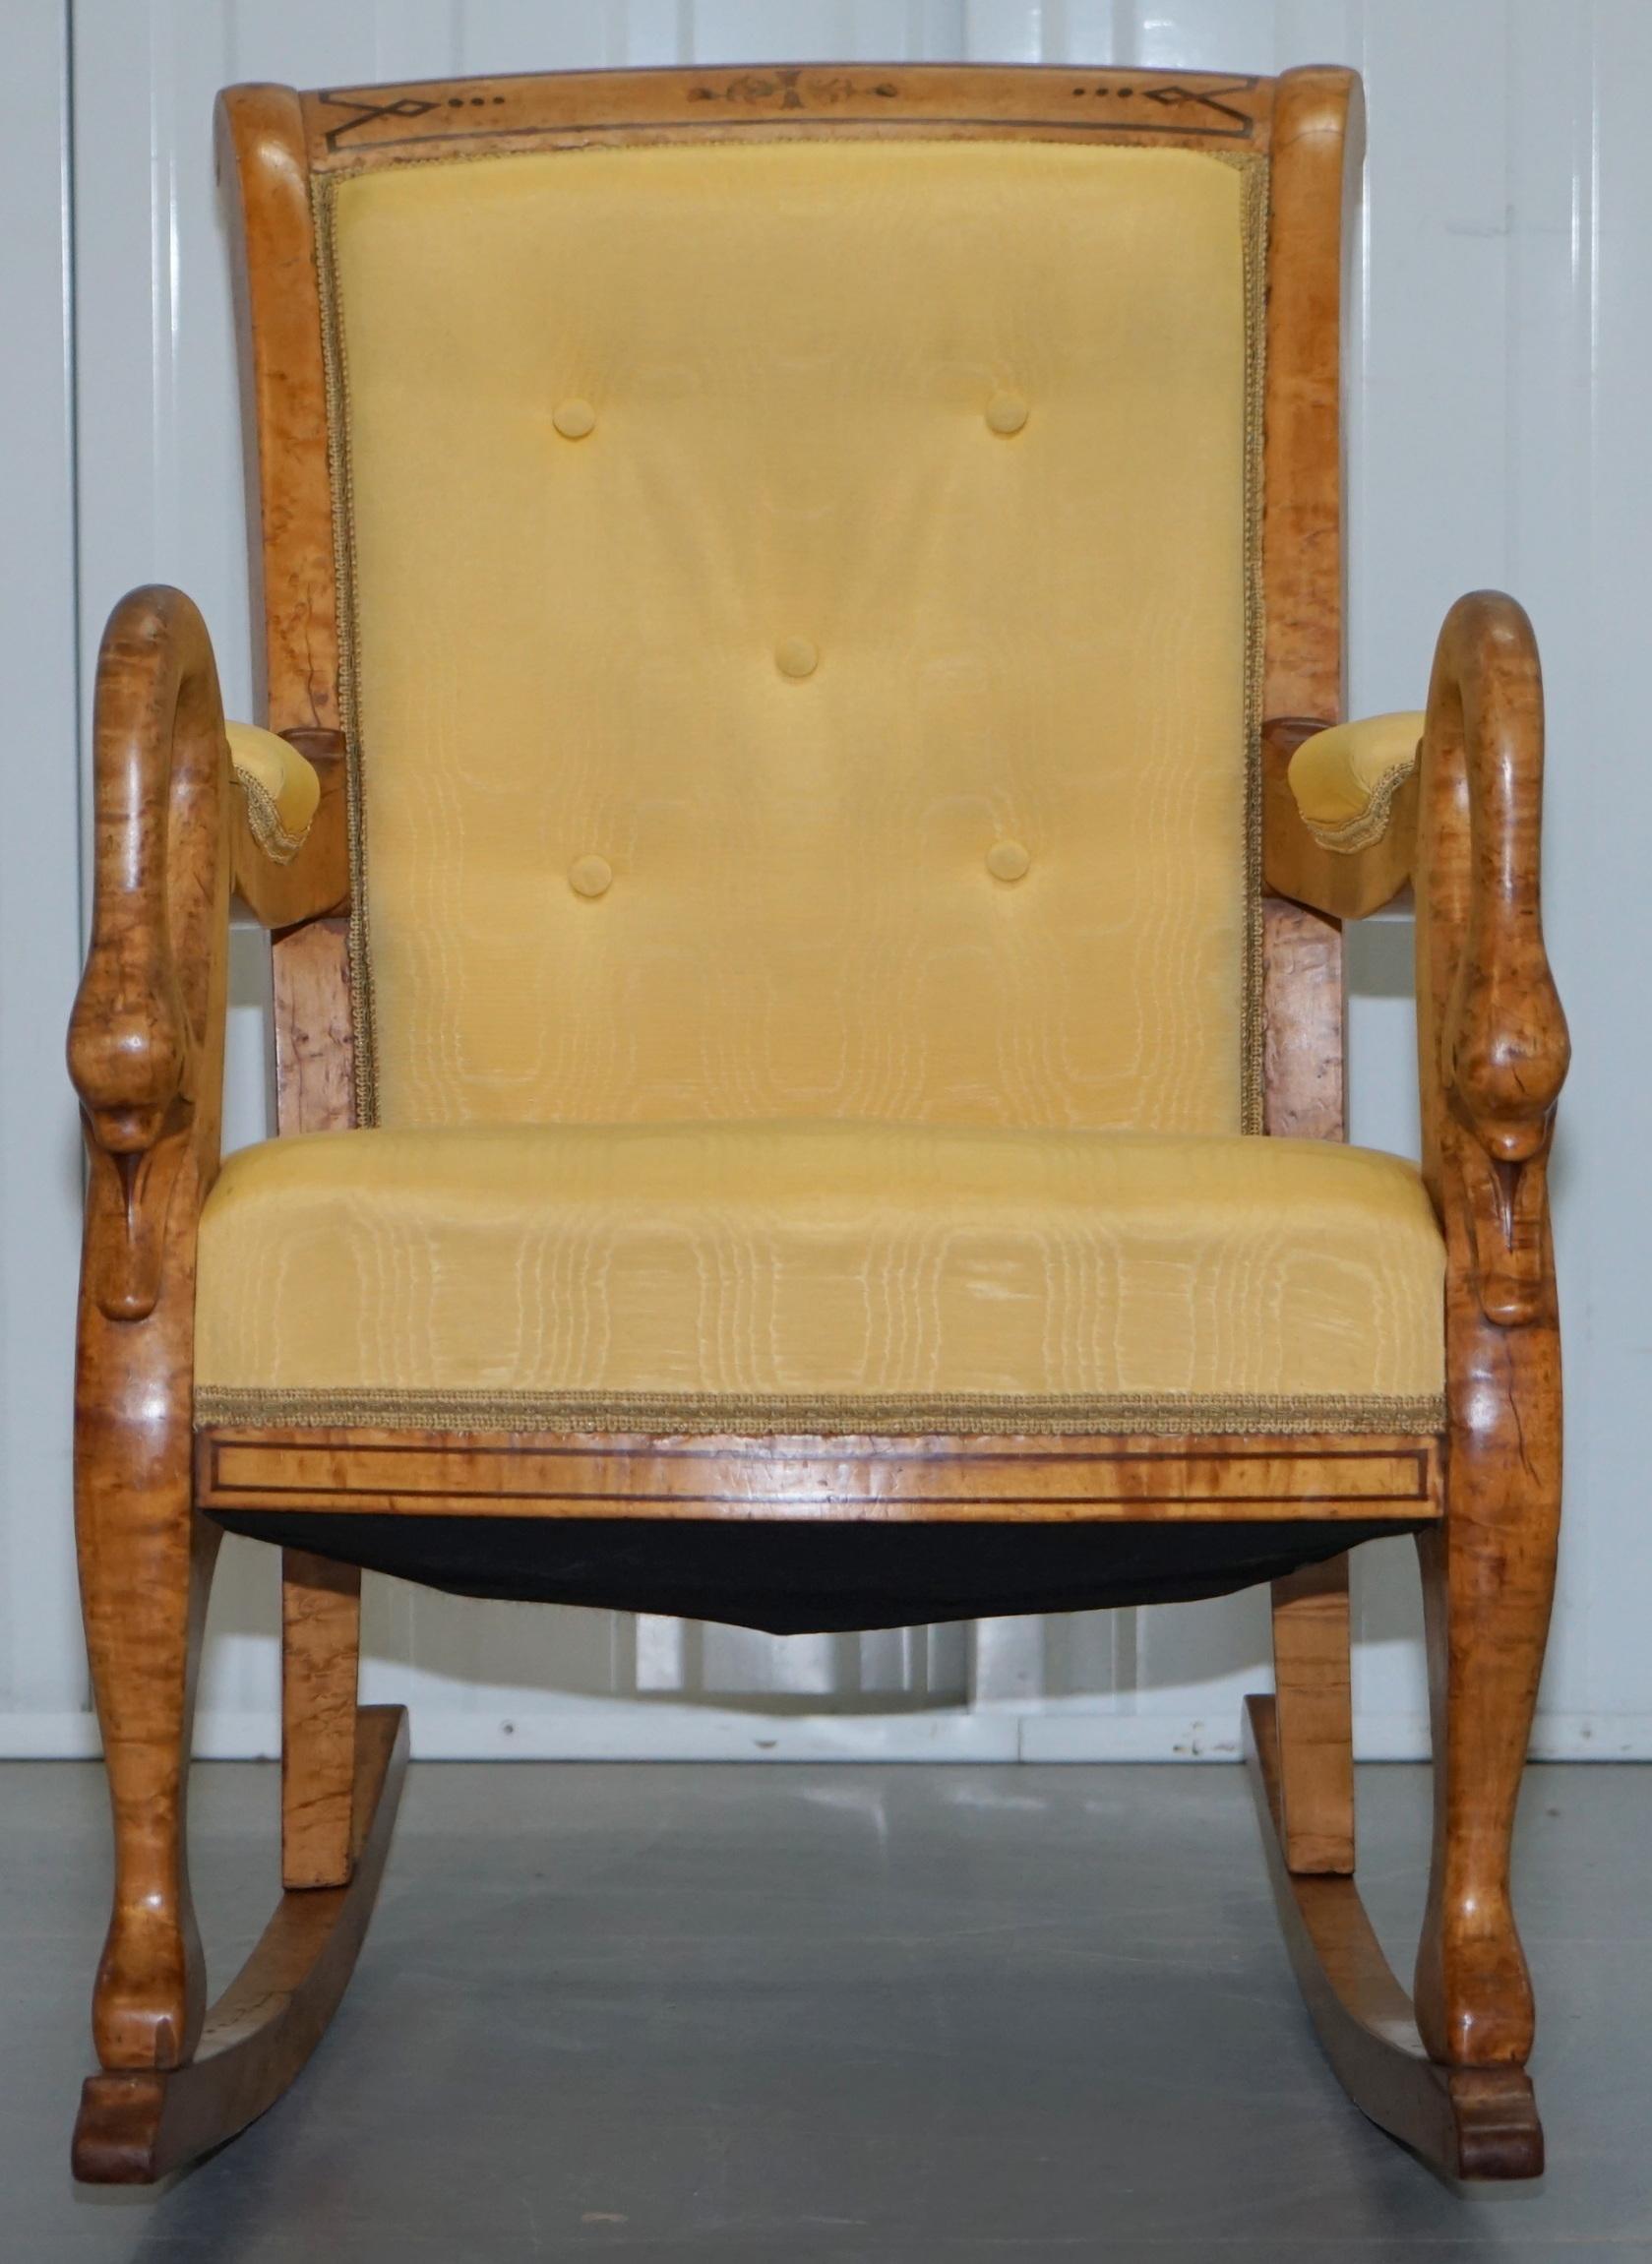 We are delighted to this very rare original Charles X circa 1825 hand carved rocking chair depicting swans heads on the arms

This is one of the best looking armchairs I have ever seen, hand carved from solid Burr Maple depicting Swans heads to